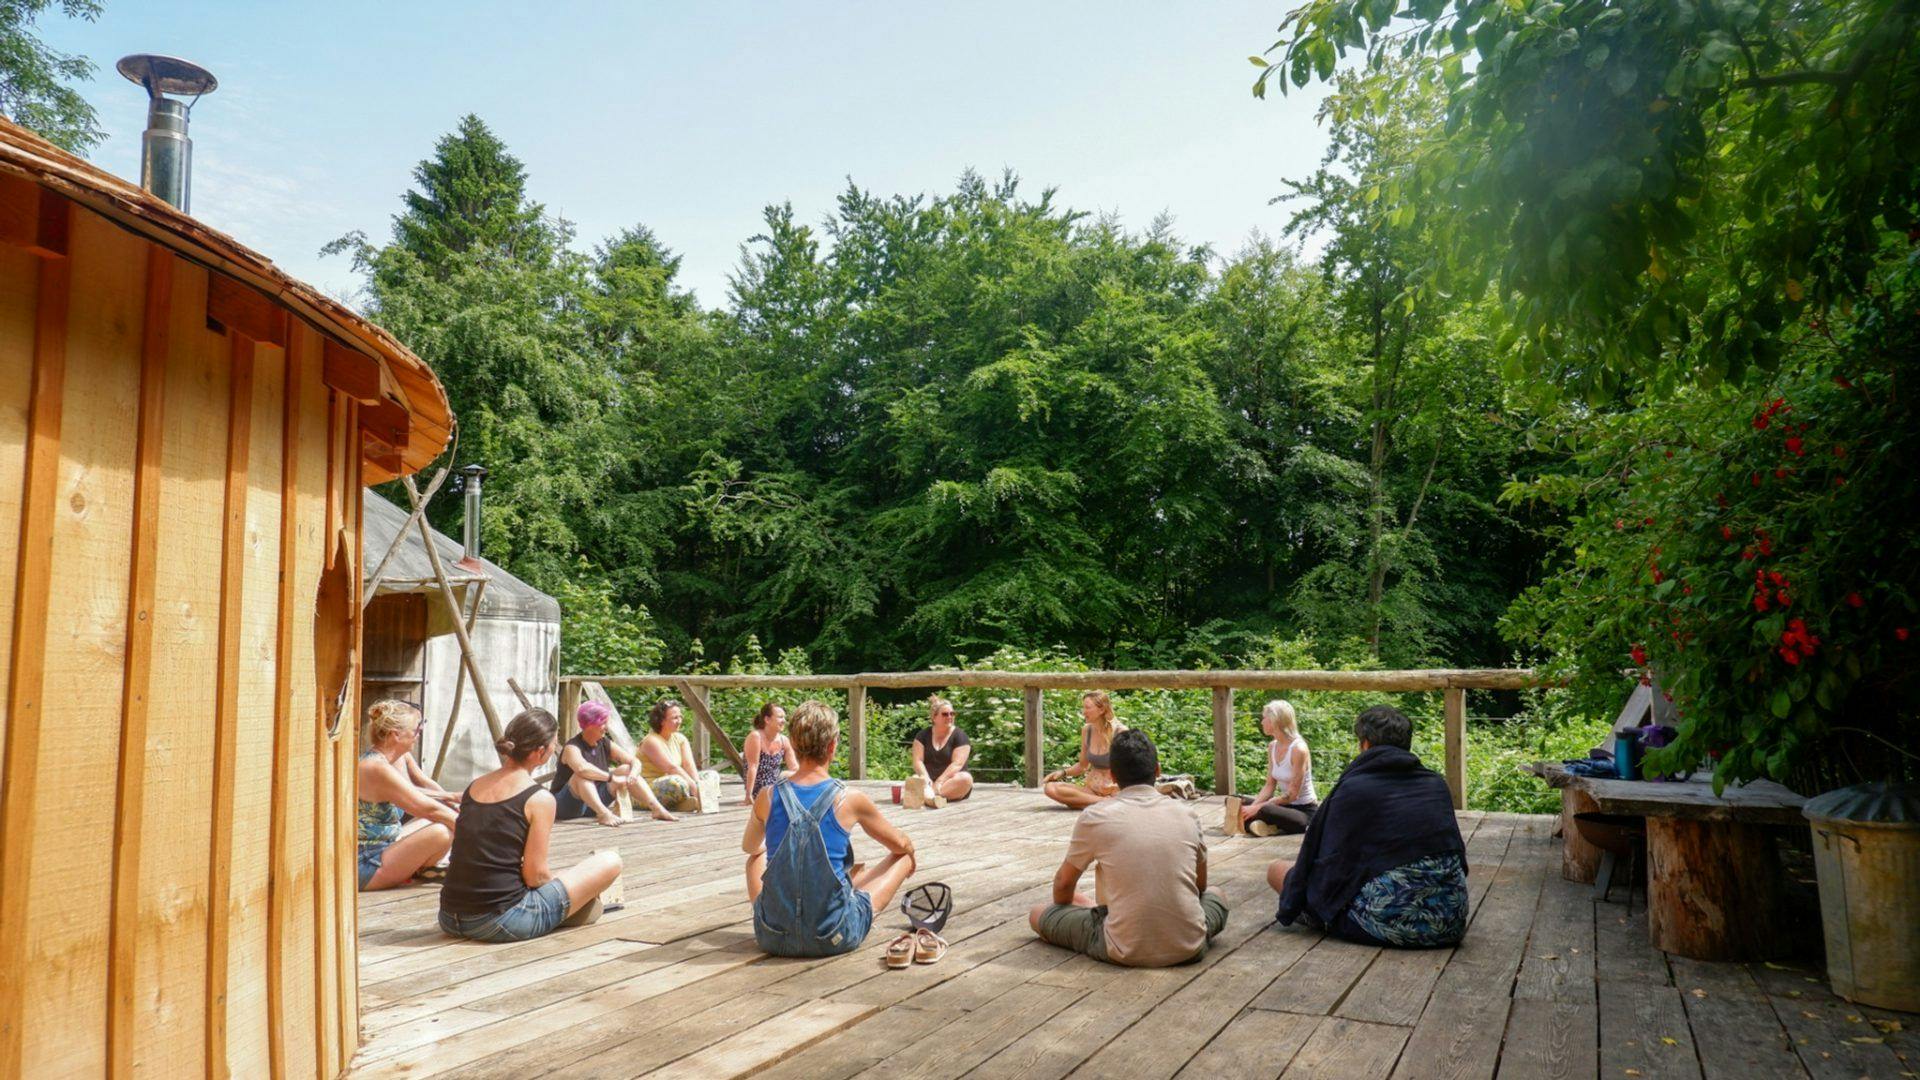 Yoga, Yurts and Paddleboarding in the Woods